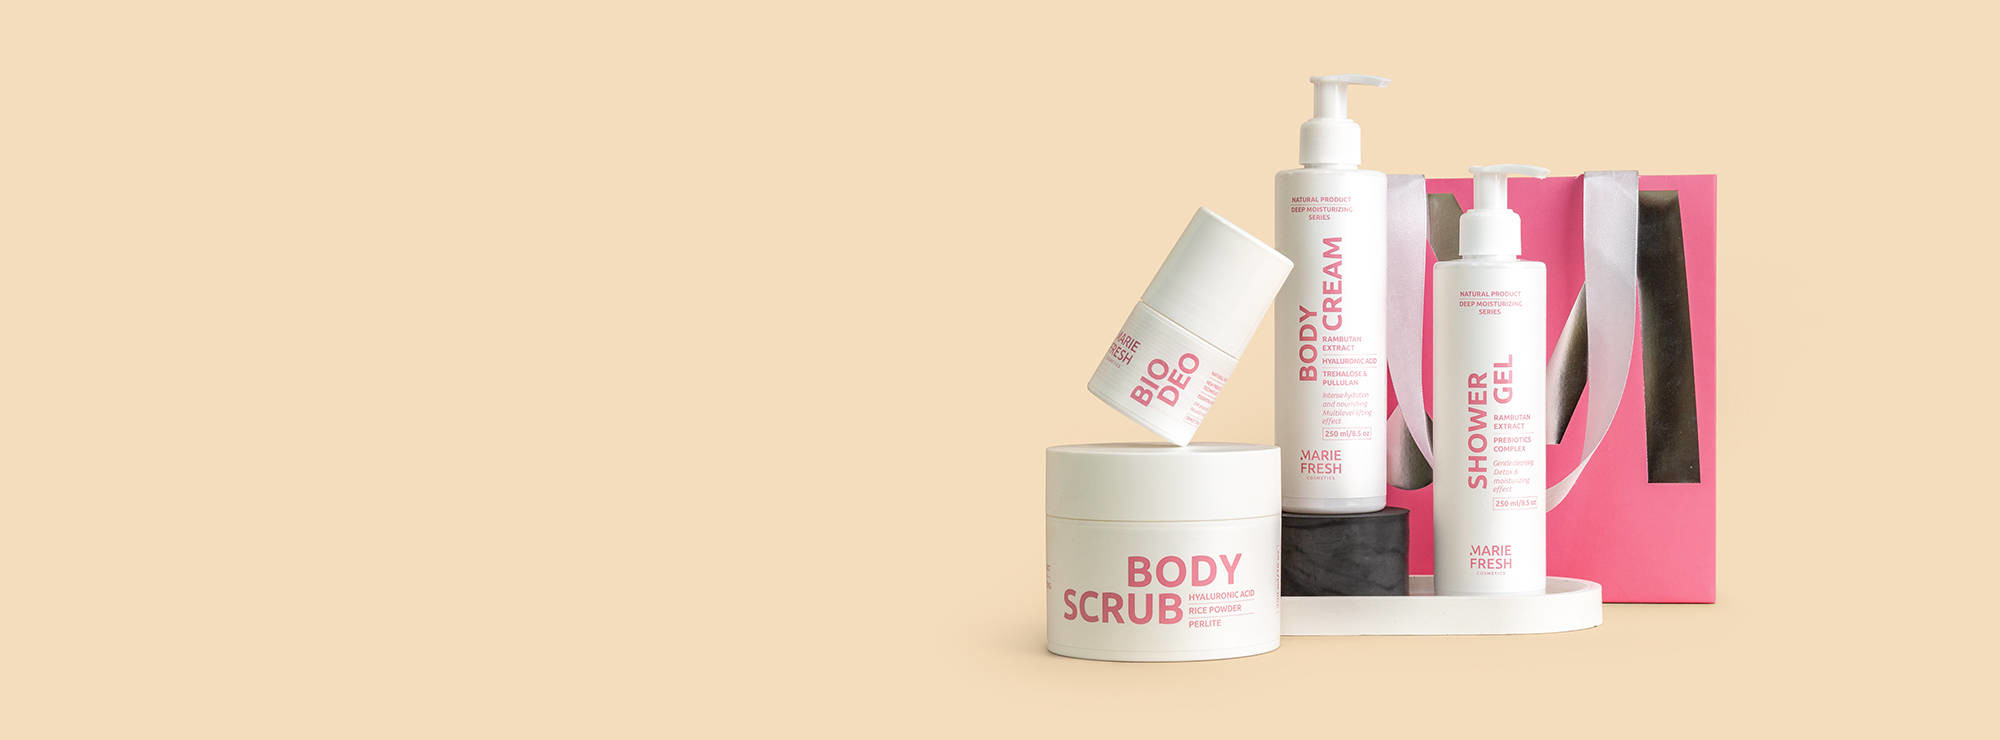 An updated body series with deodorant is already on sale!